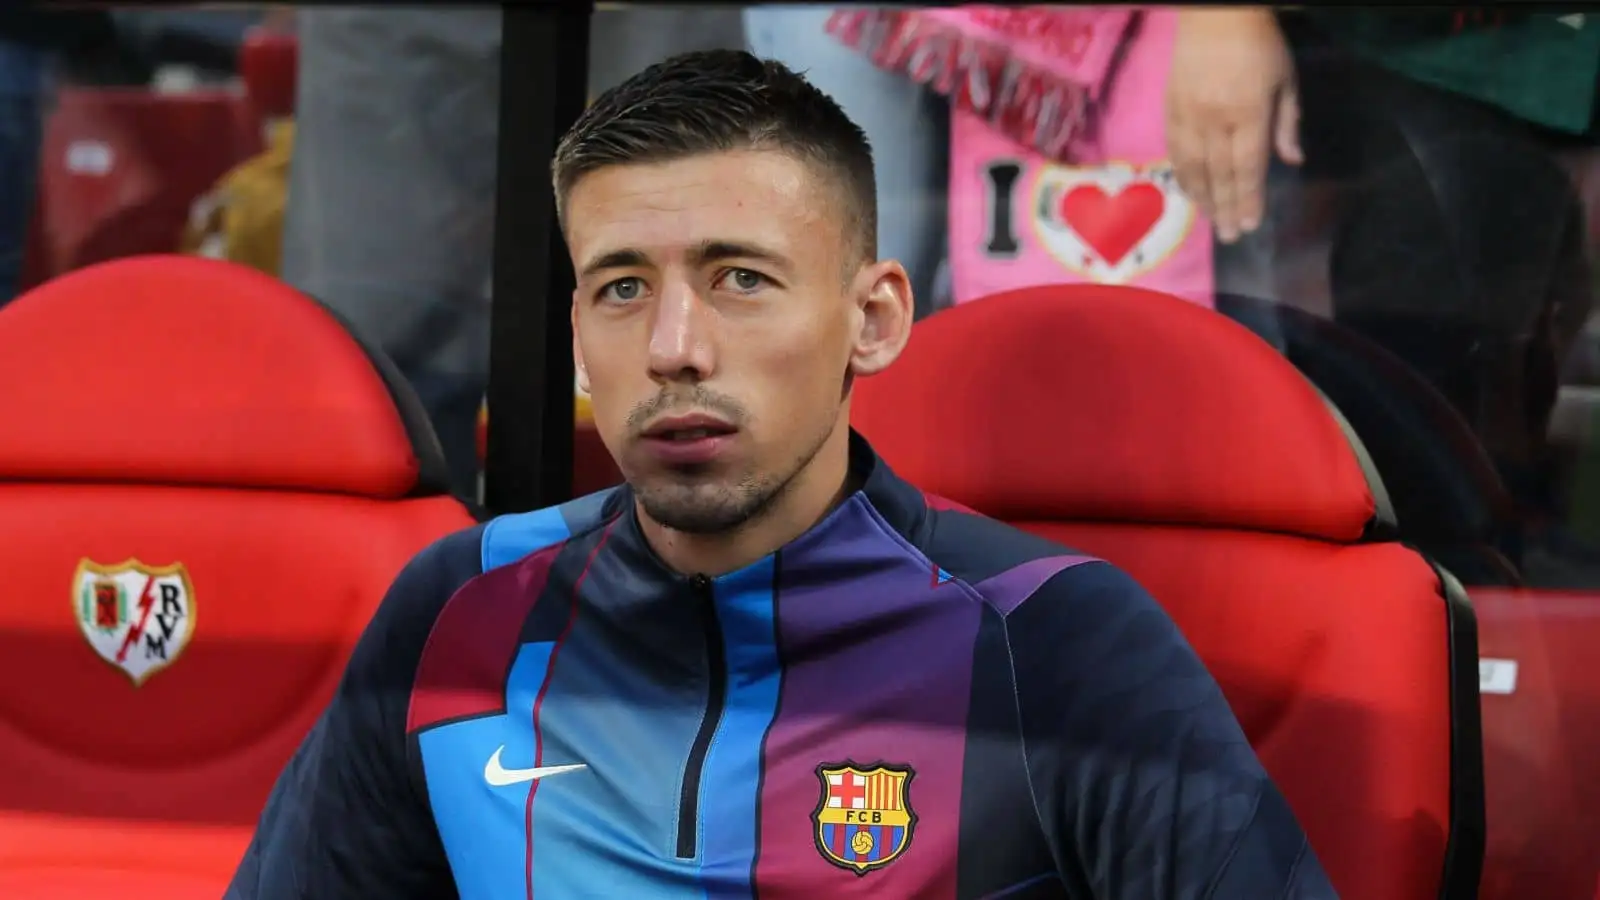 Clement Lenglet of FC Barcelona during the Spanish championship La Liga football match between Rayo Vallecano and FC Barcelona on October 27, 2021 at Vallecas stadium in Madrid